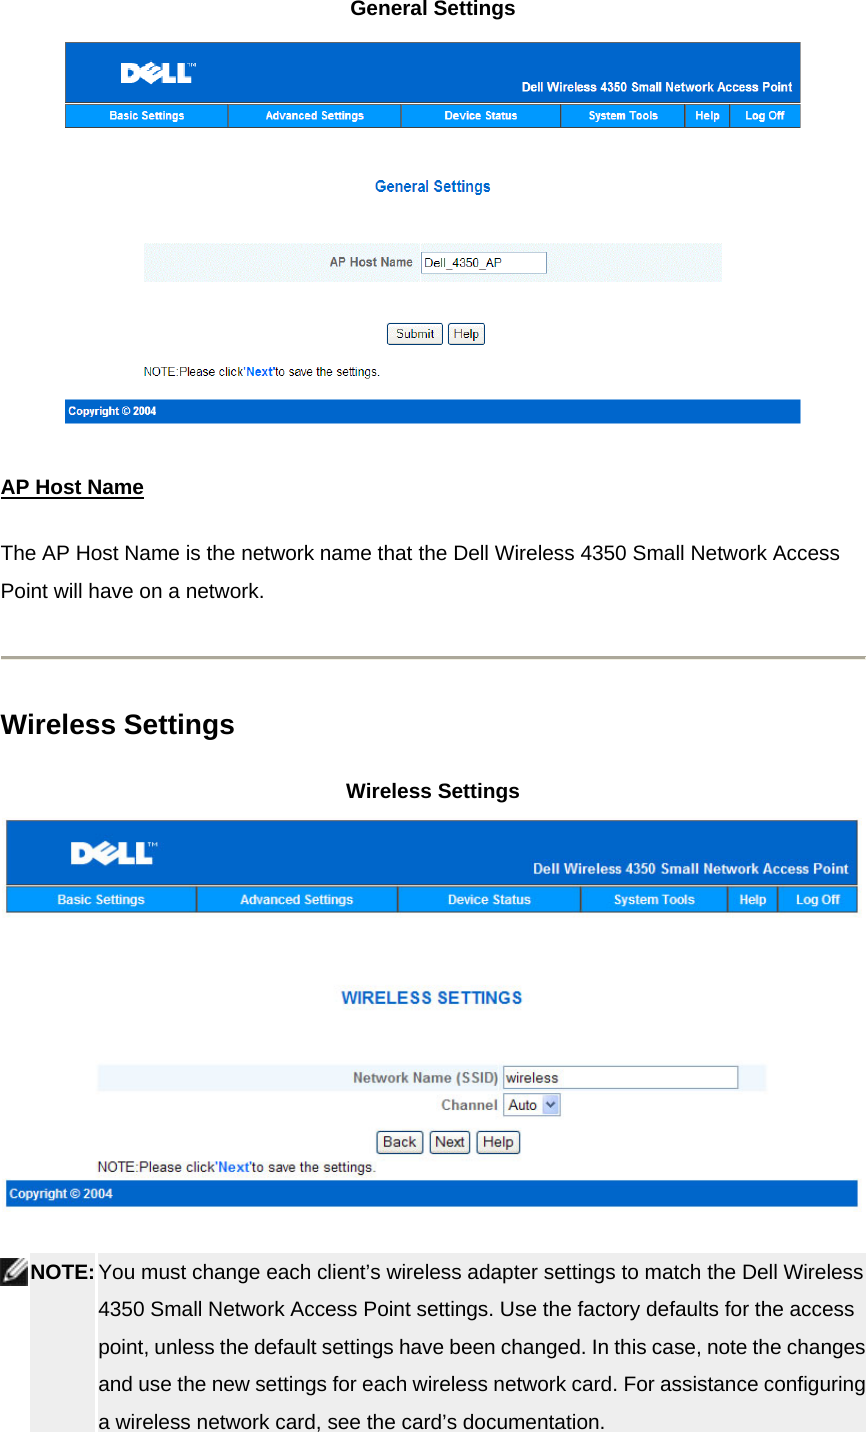 General Settings  AP Host NameThe AP Host Name is the network name that the Dell Wireless 4350 Small Network Access Point will have on a network.    Wireless Settings Wireless Settings   NOTE: You must change each client’s wireless adapter settings to match the Dell Wireless 4350 Small Network Access Point settings. Use the factory defaults for the access point, unless the default settings have been changed. In this case, note the changes and use the new settings for each wireless network card. For assistance configuring a wireless network card, see the card’s documentation.  